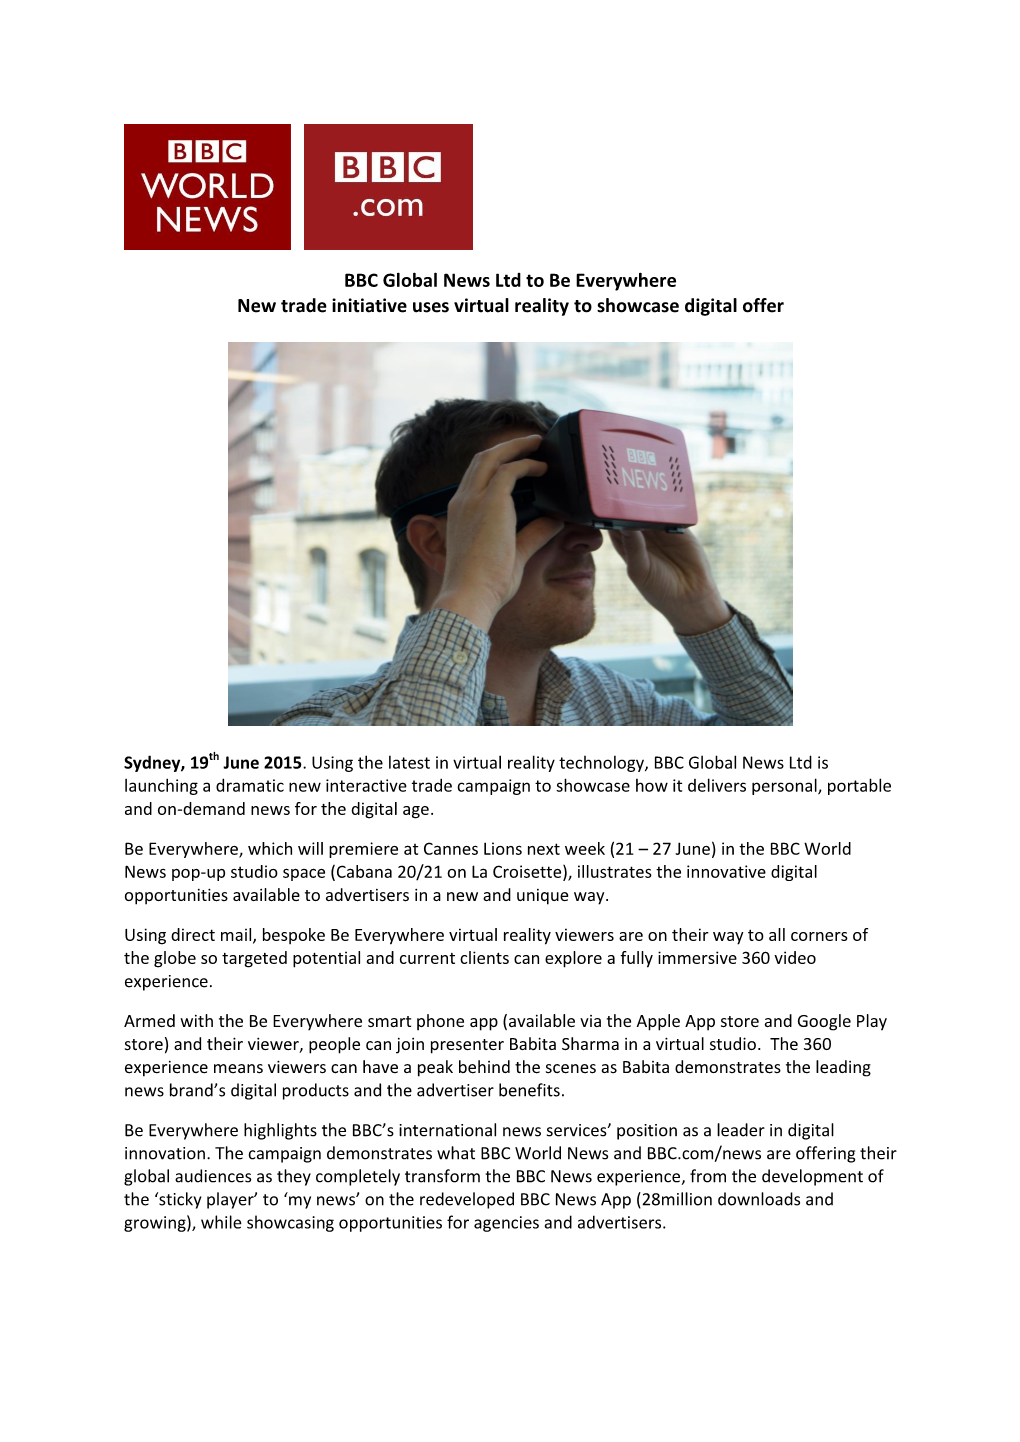 BBC Global News Ltd to Be Everywhere New Trade Initiative Uses Virtual Reality to Showcase Digital Offer